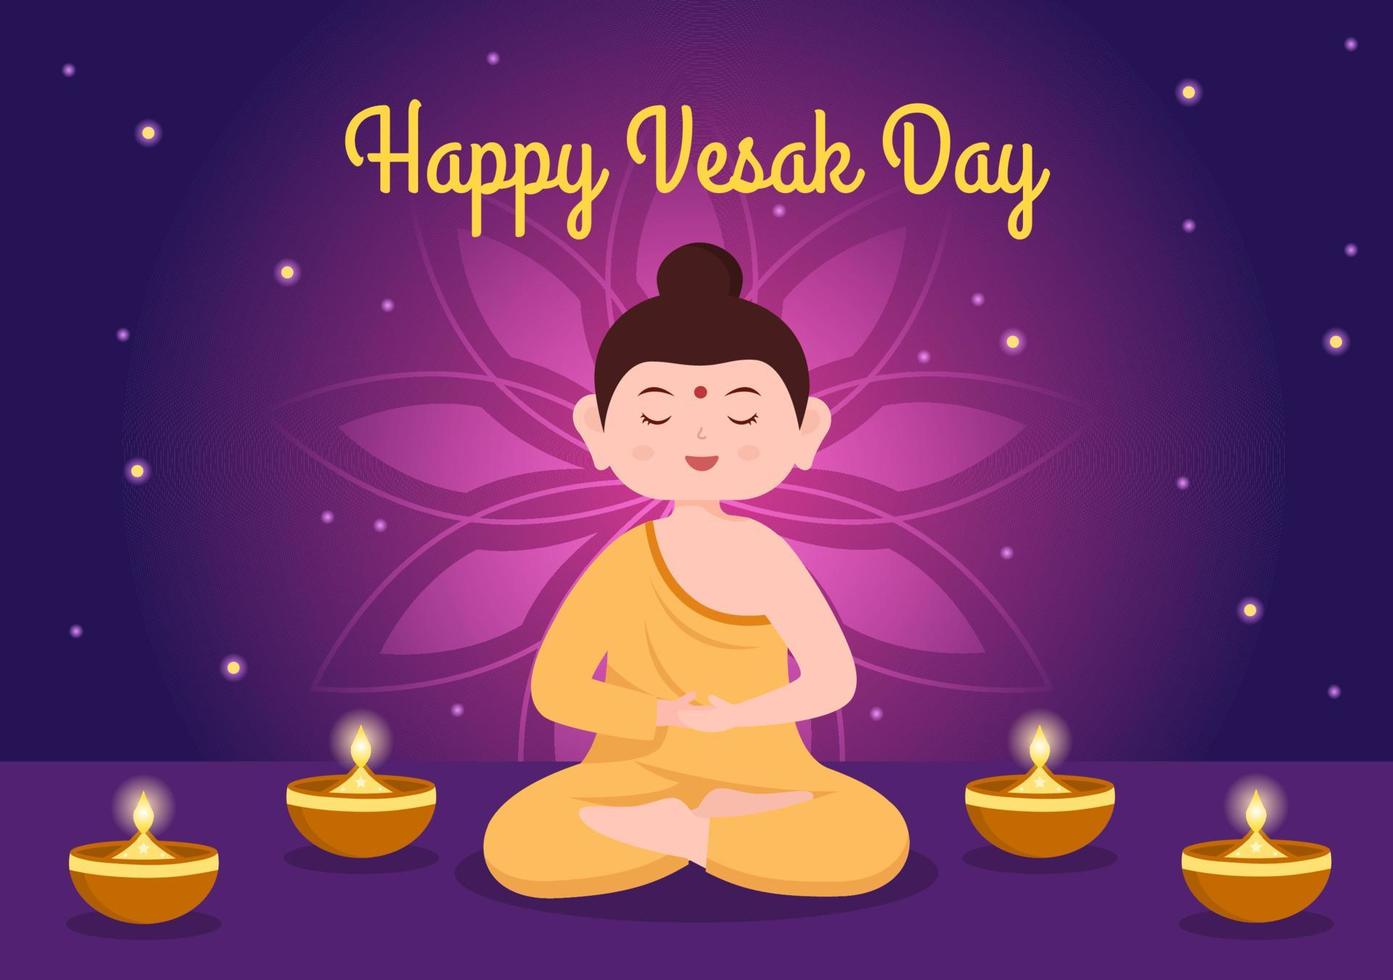 Vesak Day Celebration with Temple Silhouette, Lotus Flower Decoration, Lantern or Buddha Person in Flat Cartoon Background Illustration for Greeting Card vector